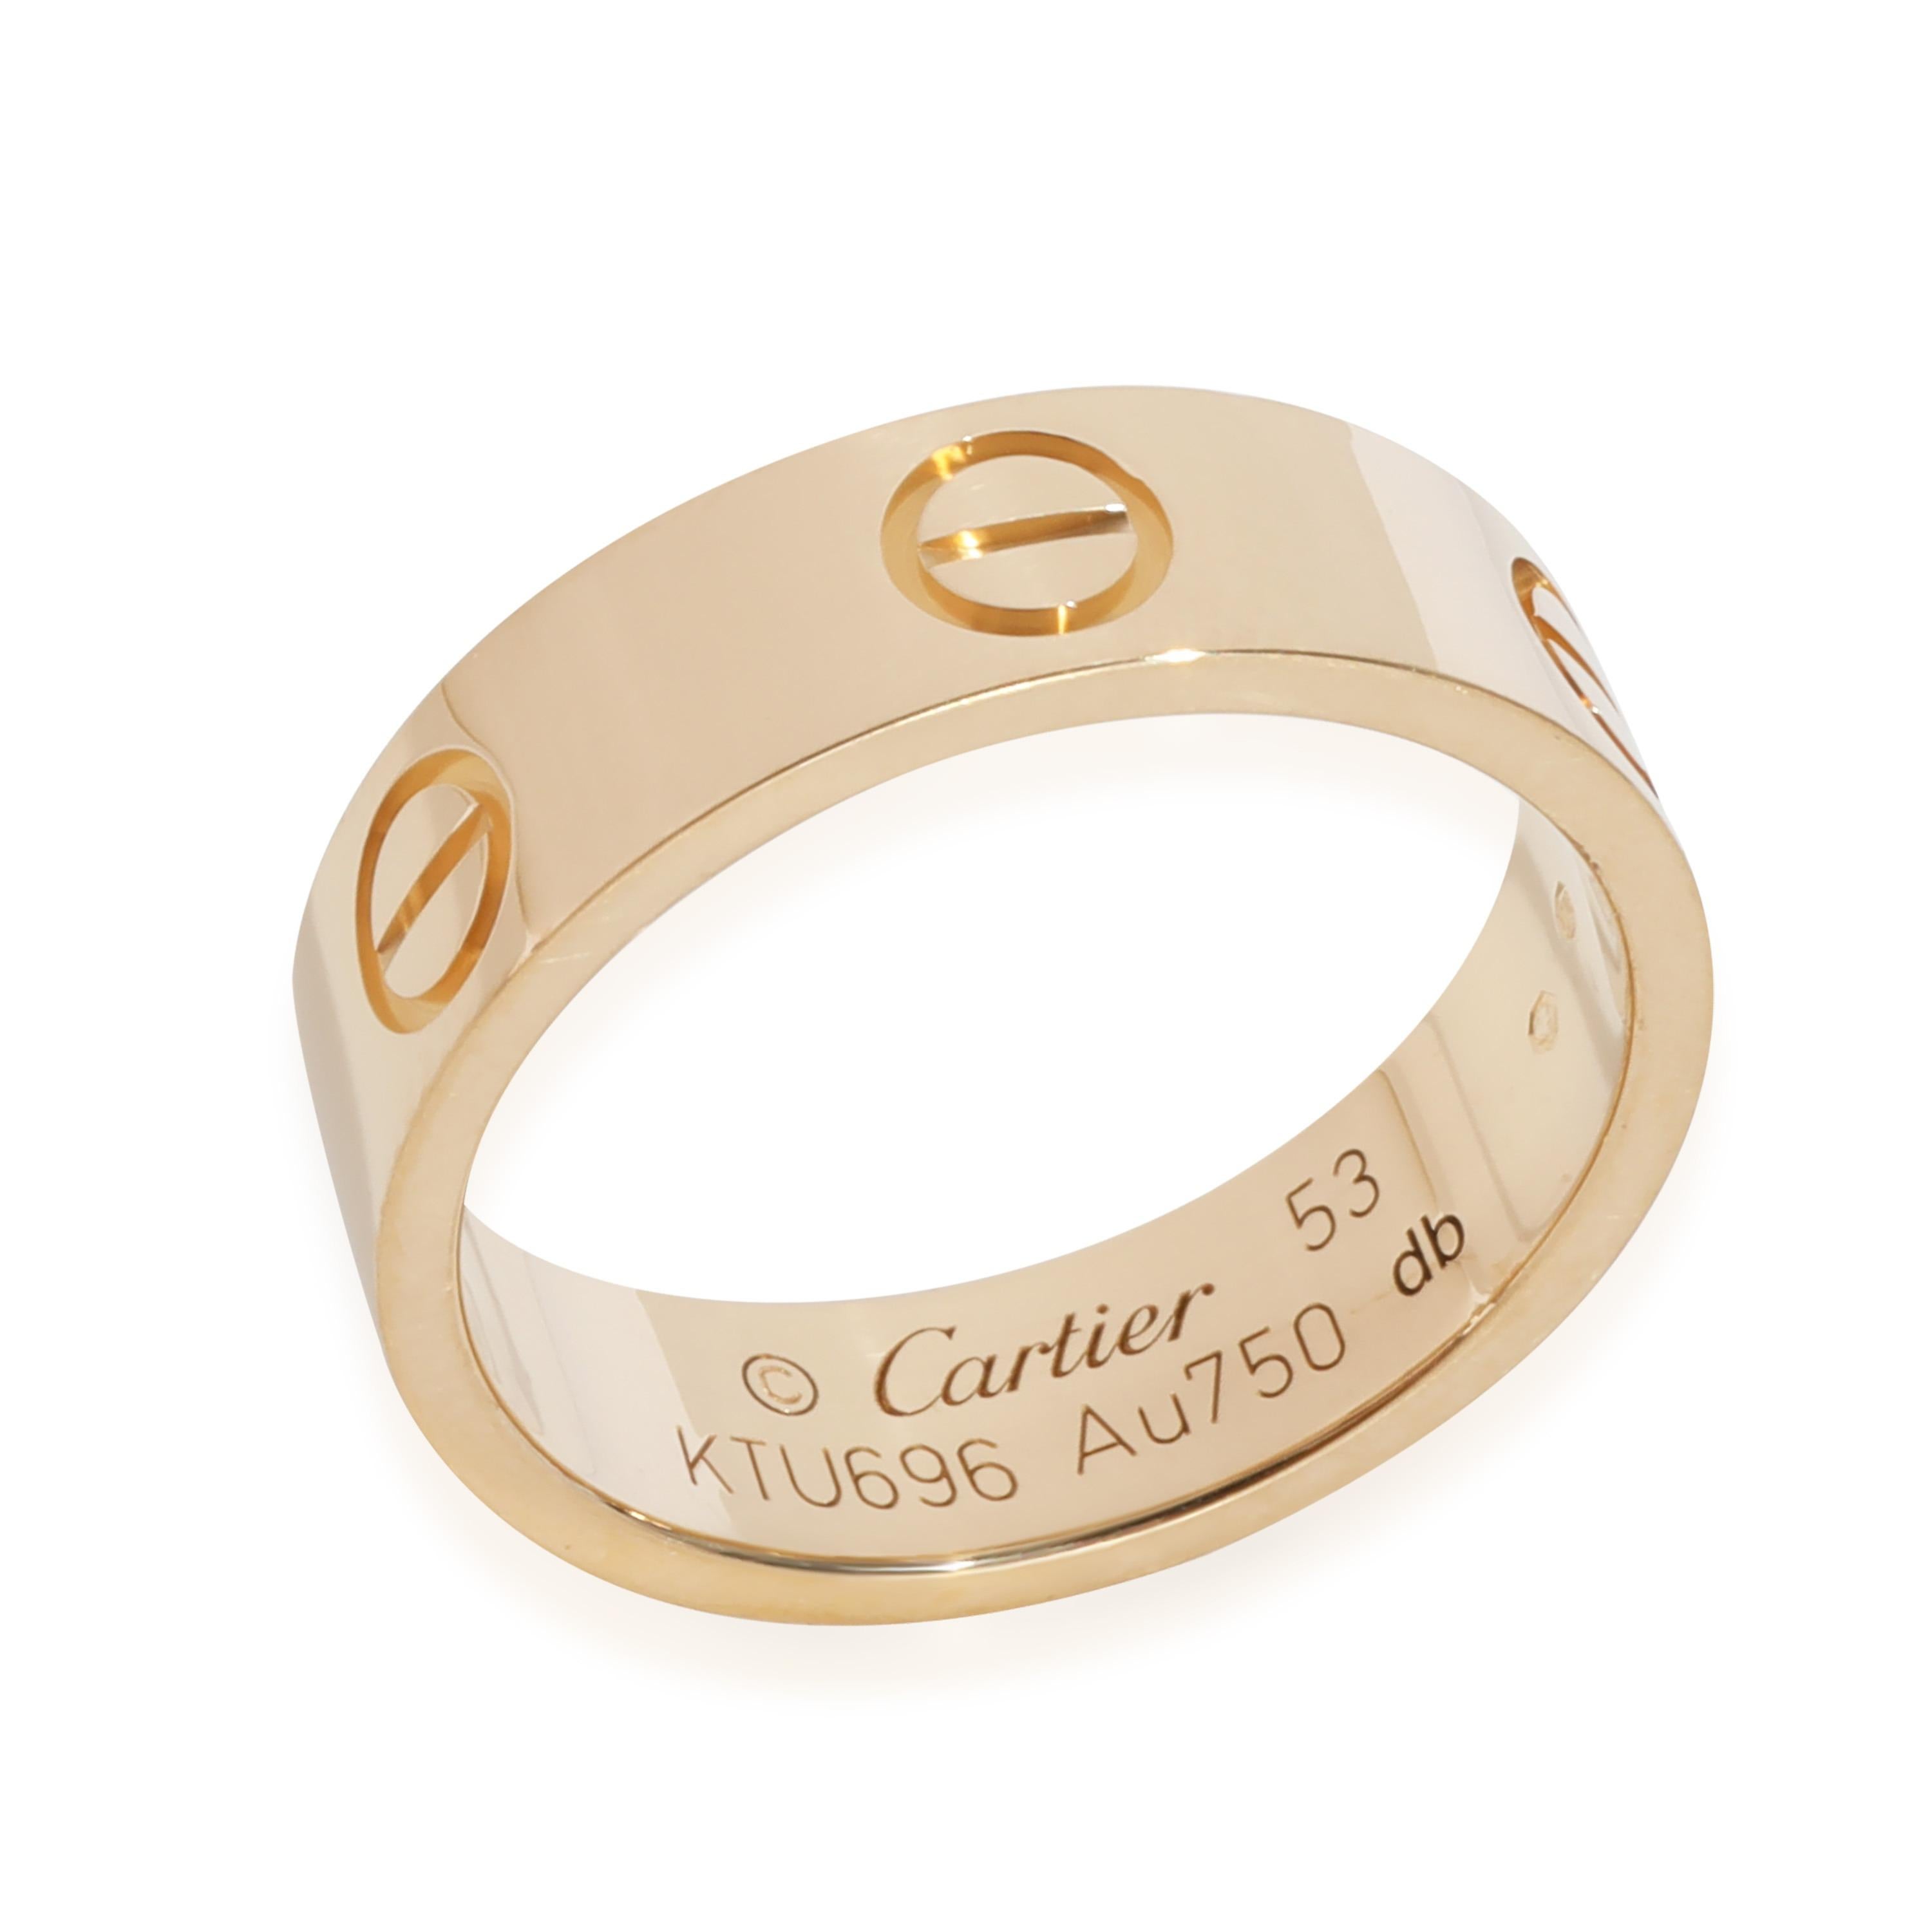 Cartier Love Ring in 18k Yellow Gold

PRIMARY DETAILS
SKU: 128968
Listing Title: Cartier Love Ring in 18k Yellow Gold
Condition Description: Cartier's Love collection is the epitome of iconic, from the recognizable designs to the history behind the